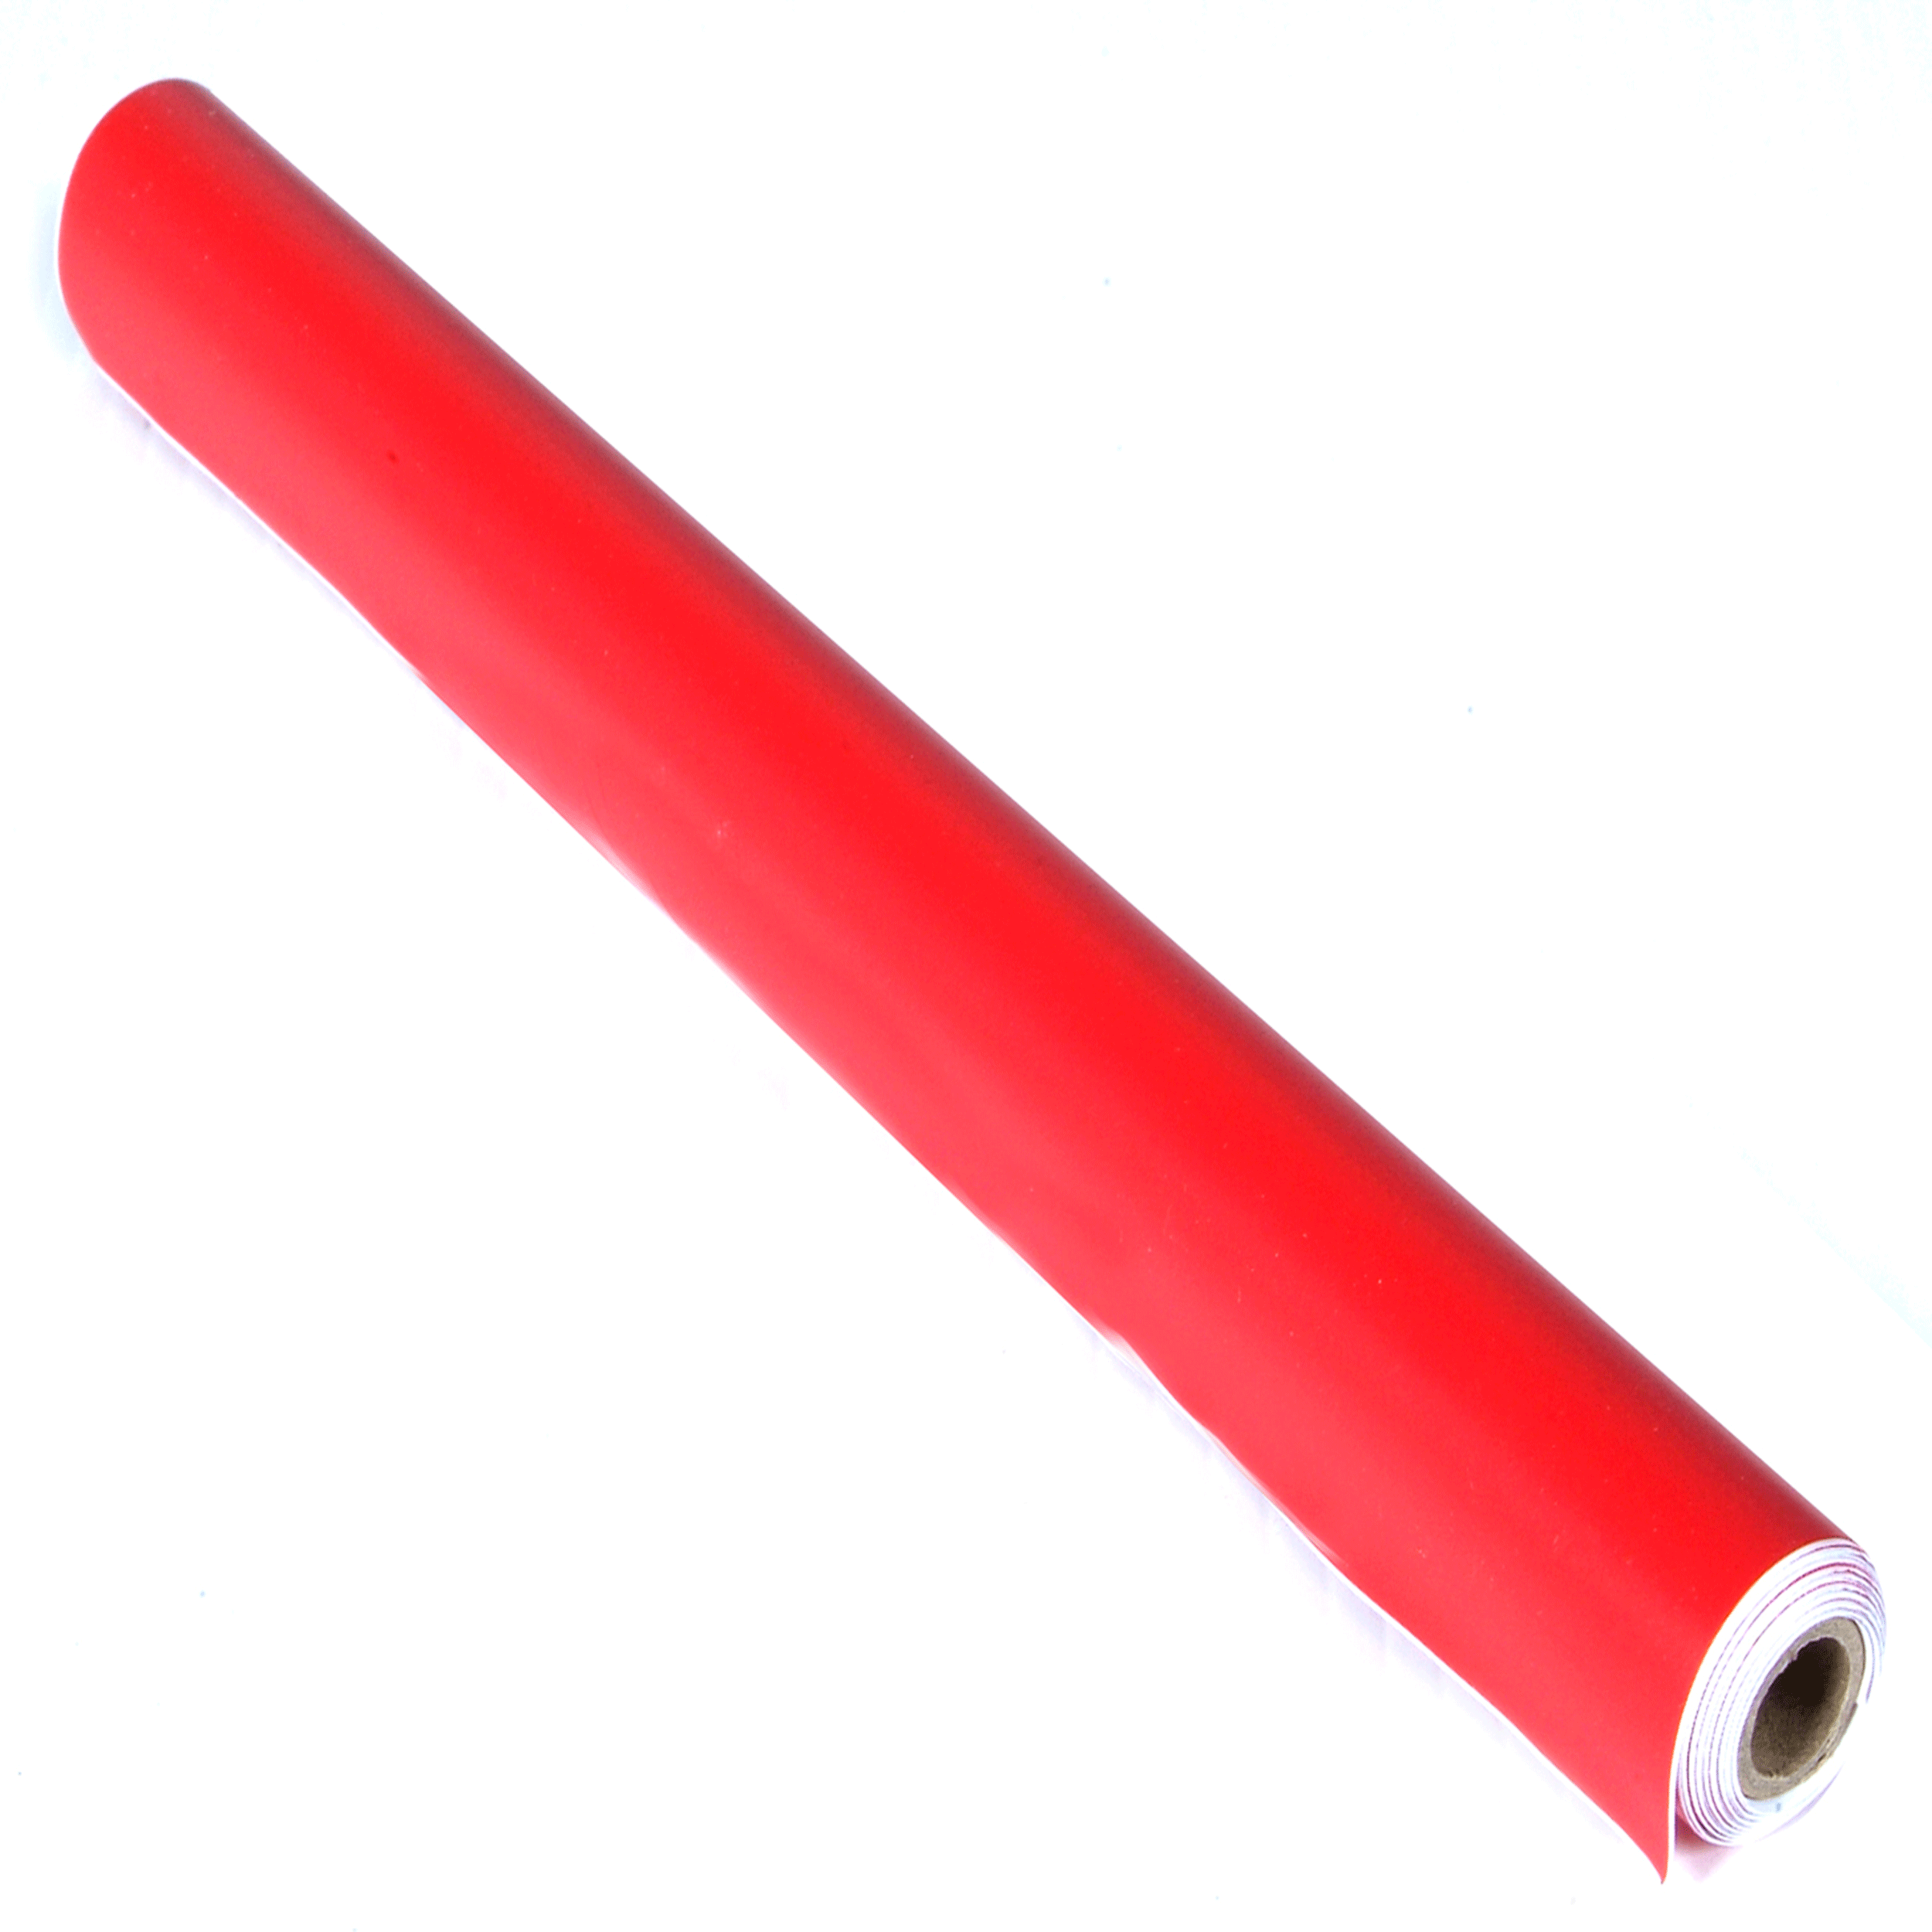 12" X 60" Shadow Board Red Vinyl Self-adhesive Tape Roll To Silhouette And Manage Tools And Equipment